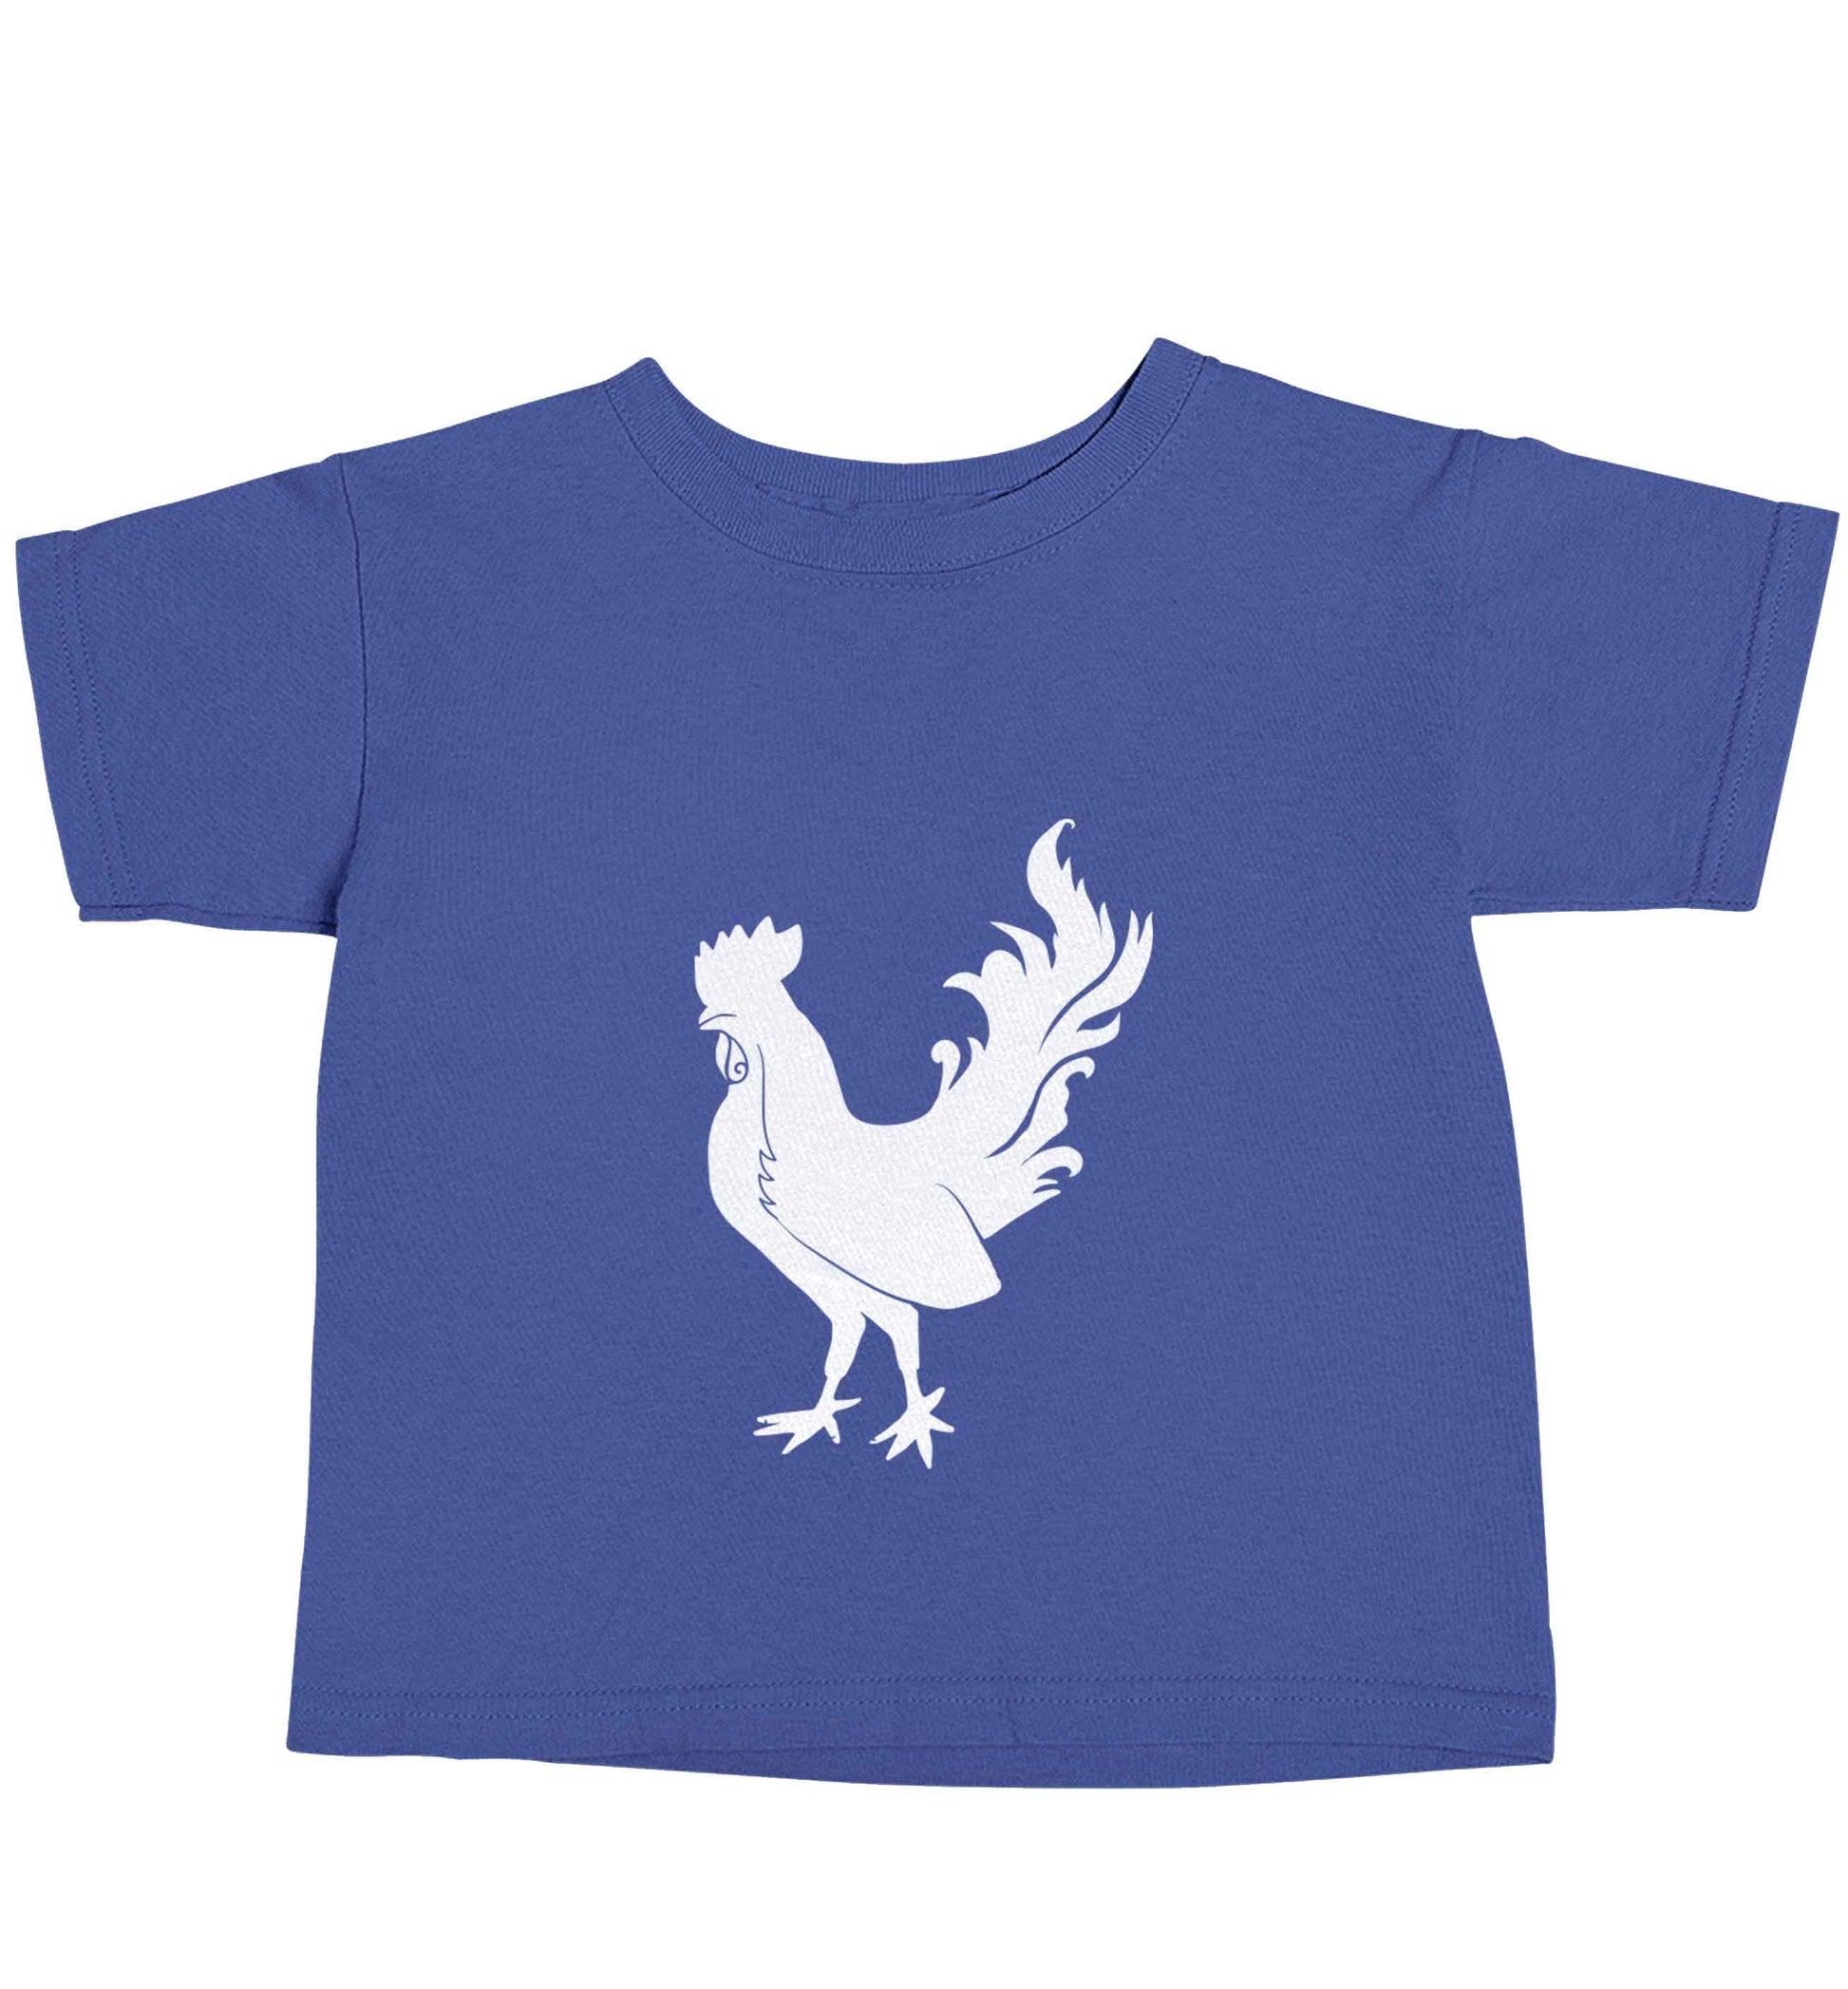 Rooster blue baby toddler Tshirt 2 Years